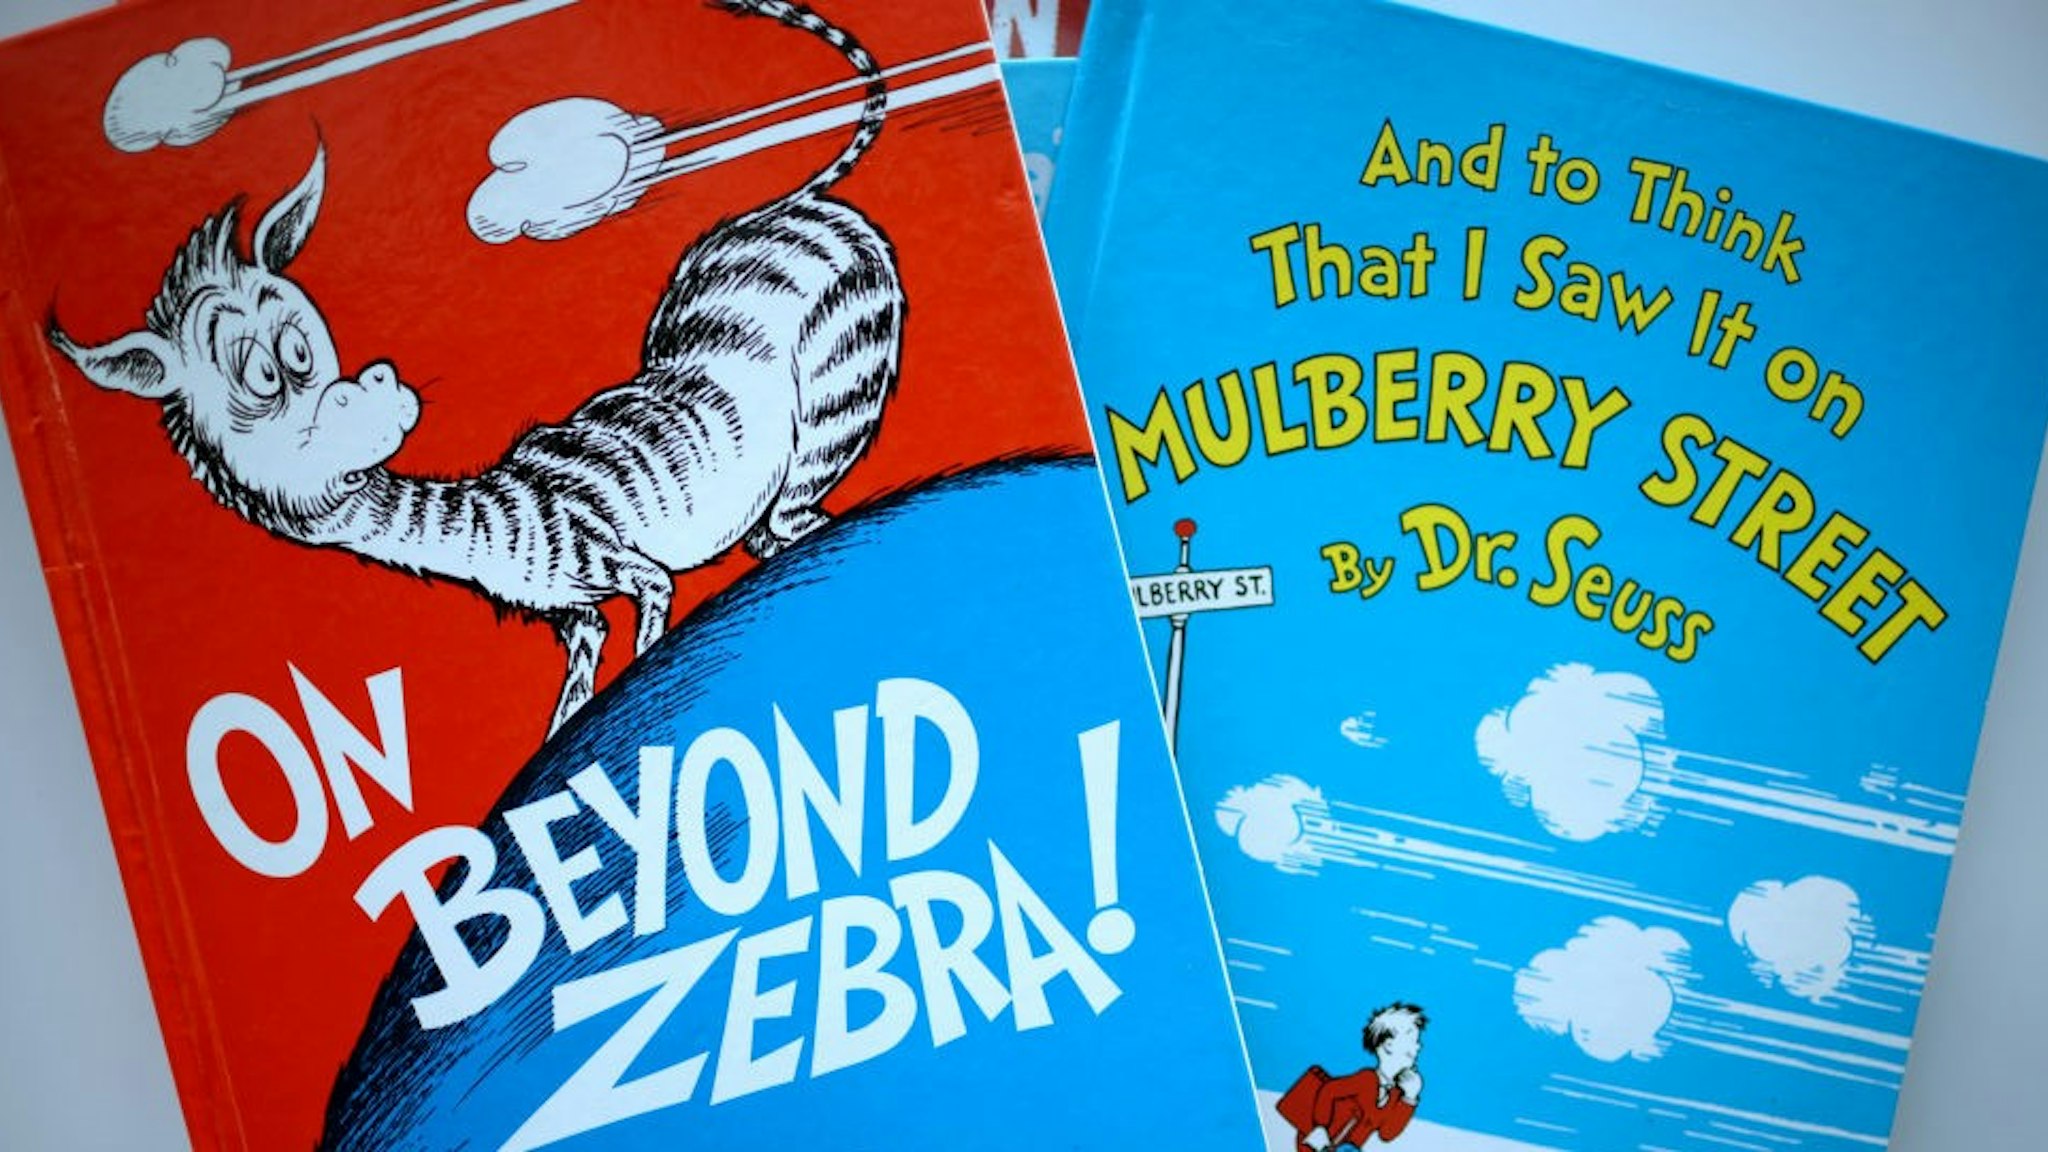 CHICAGO, ILLINOIS - MARCH 02: Books by Theodor Seuss Geisel, aka Dr. Seuss, including "On Beyond Zebra!" and "And to Think That I Saw it on Mulberry Street," are offered for loan at the Chinatown Branch of the Chicago Public Library on March 02, 2021 in Chicago, Illinois. The two titles are among six by the famed children's book author that will no longer be printed due to accusations of racist and insensitive imagery. The other titles include “If I Ran the Zoo,” “McElligot’s Pool,” “Scrambled Eggs Super!” and “The Cat’s Quizzer.” (Photo Illustration by